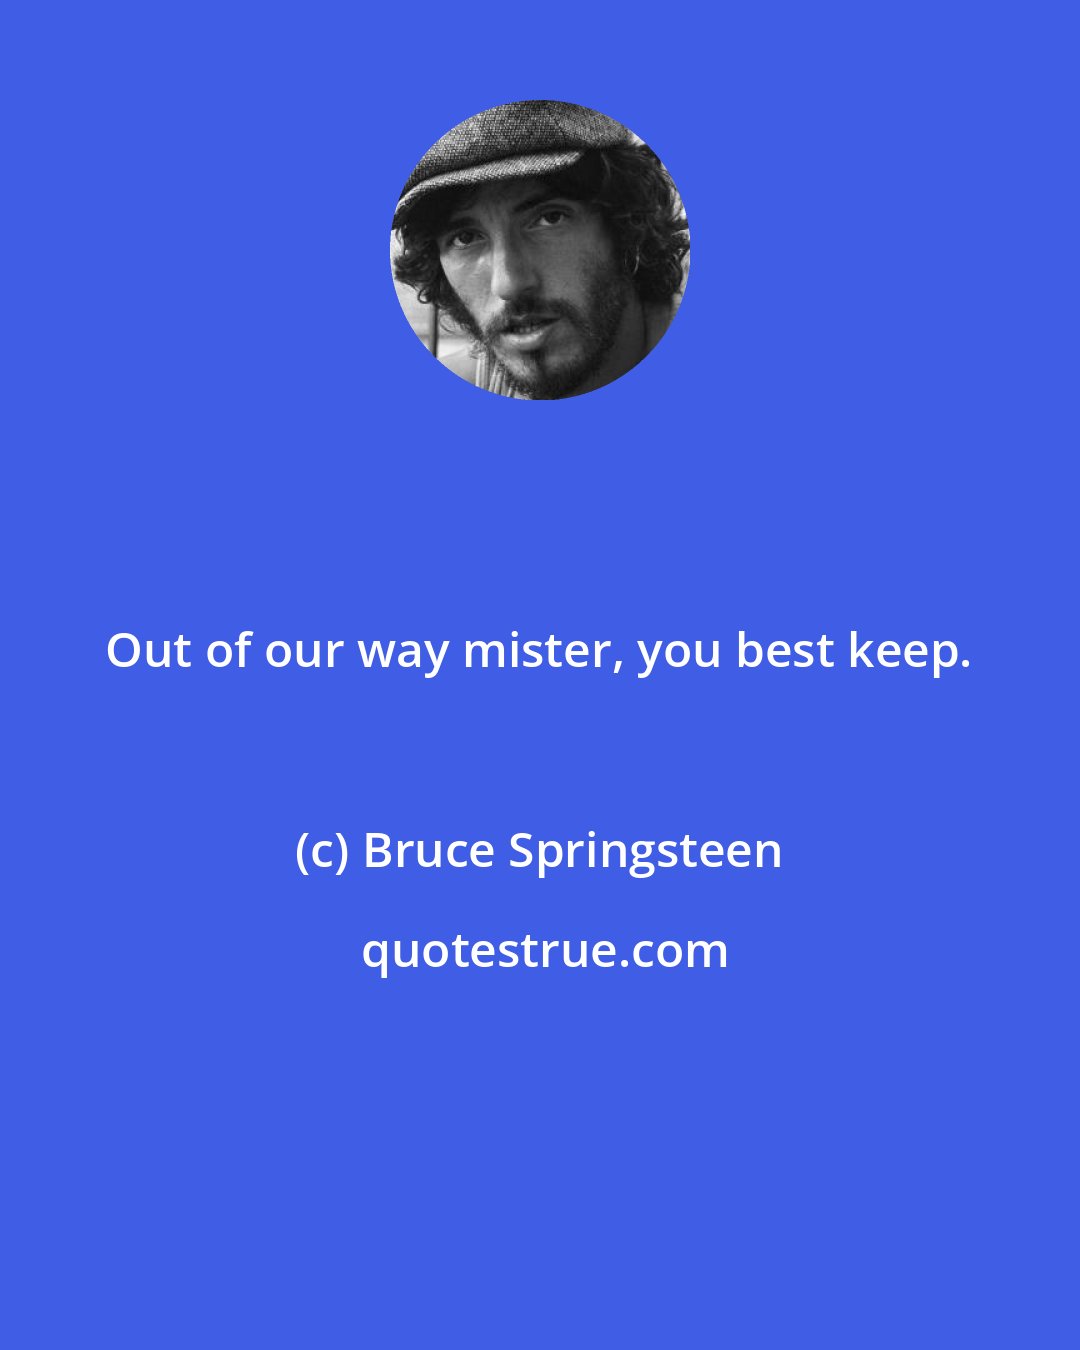 Bruce Springsteen: Out of our way mister, you best keep.